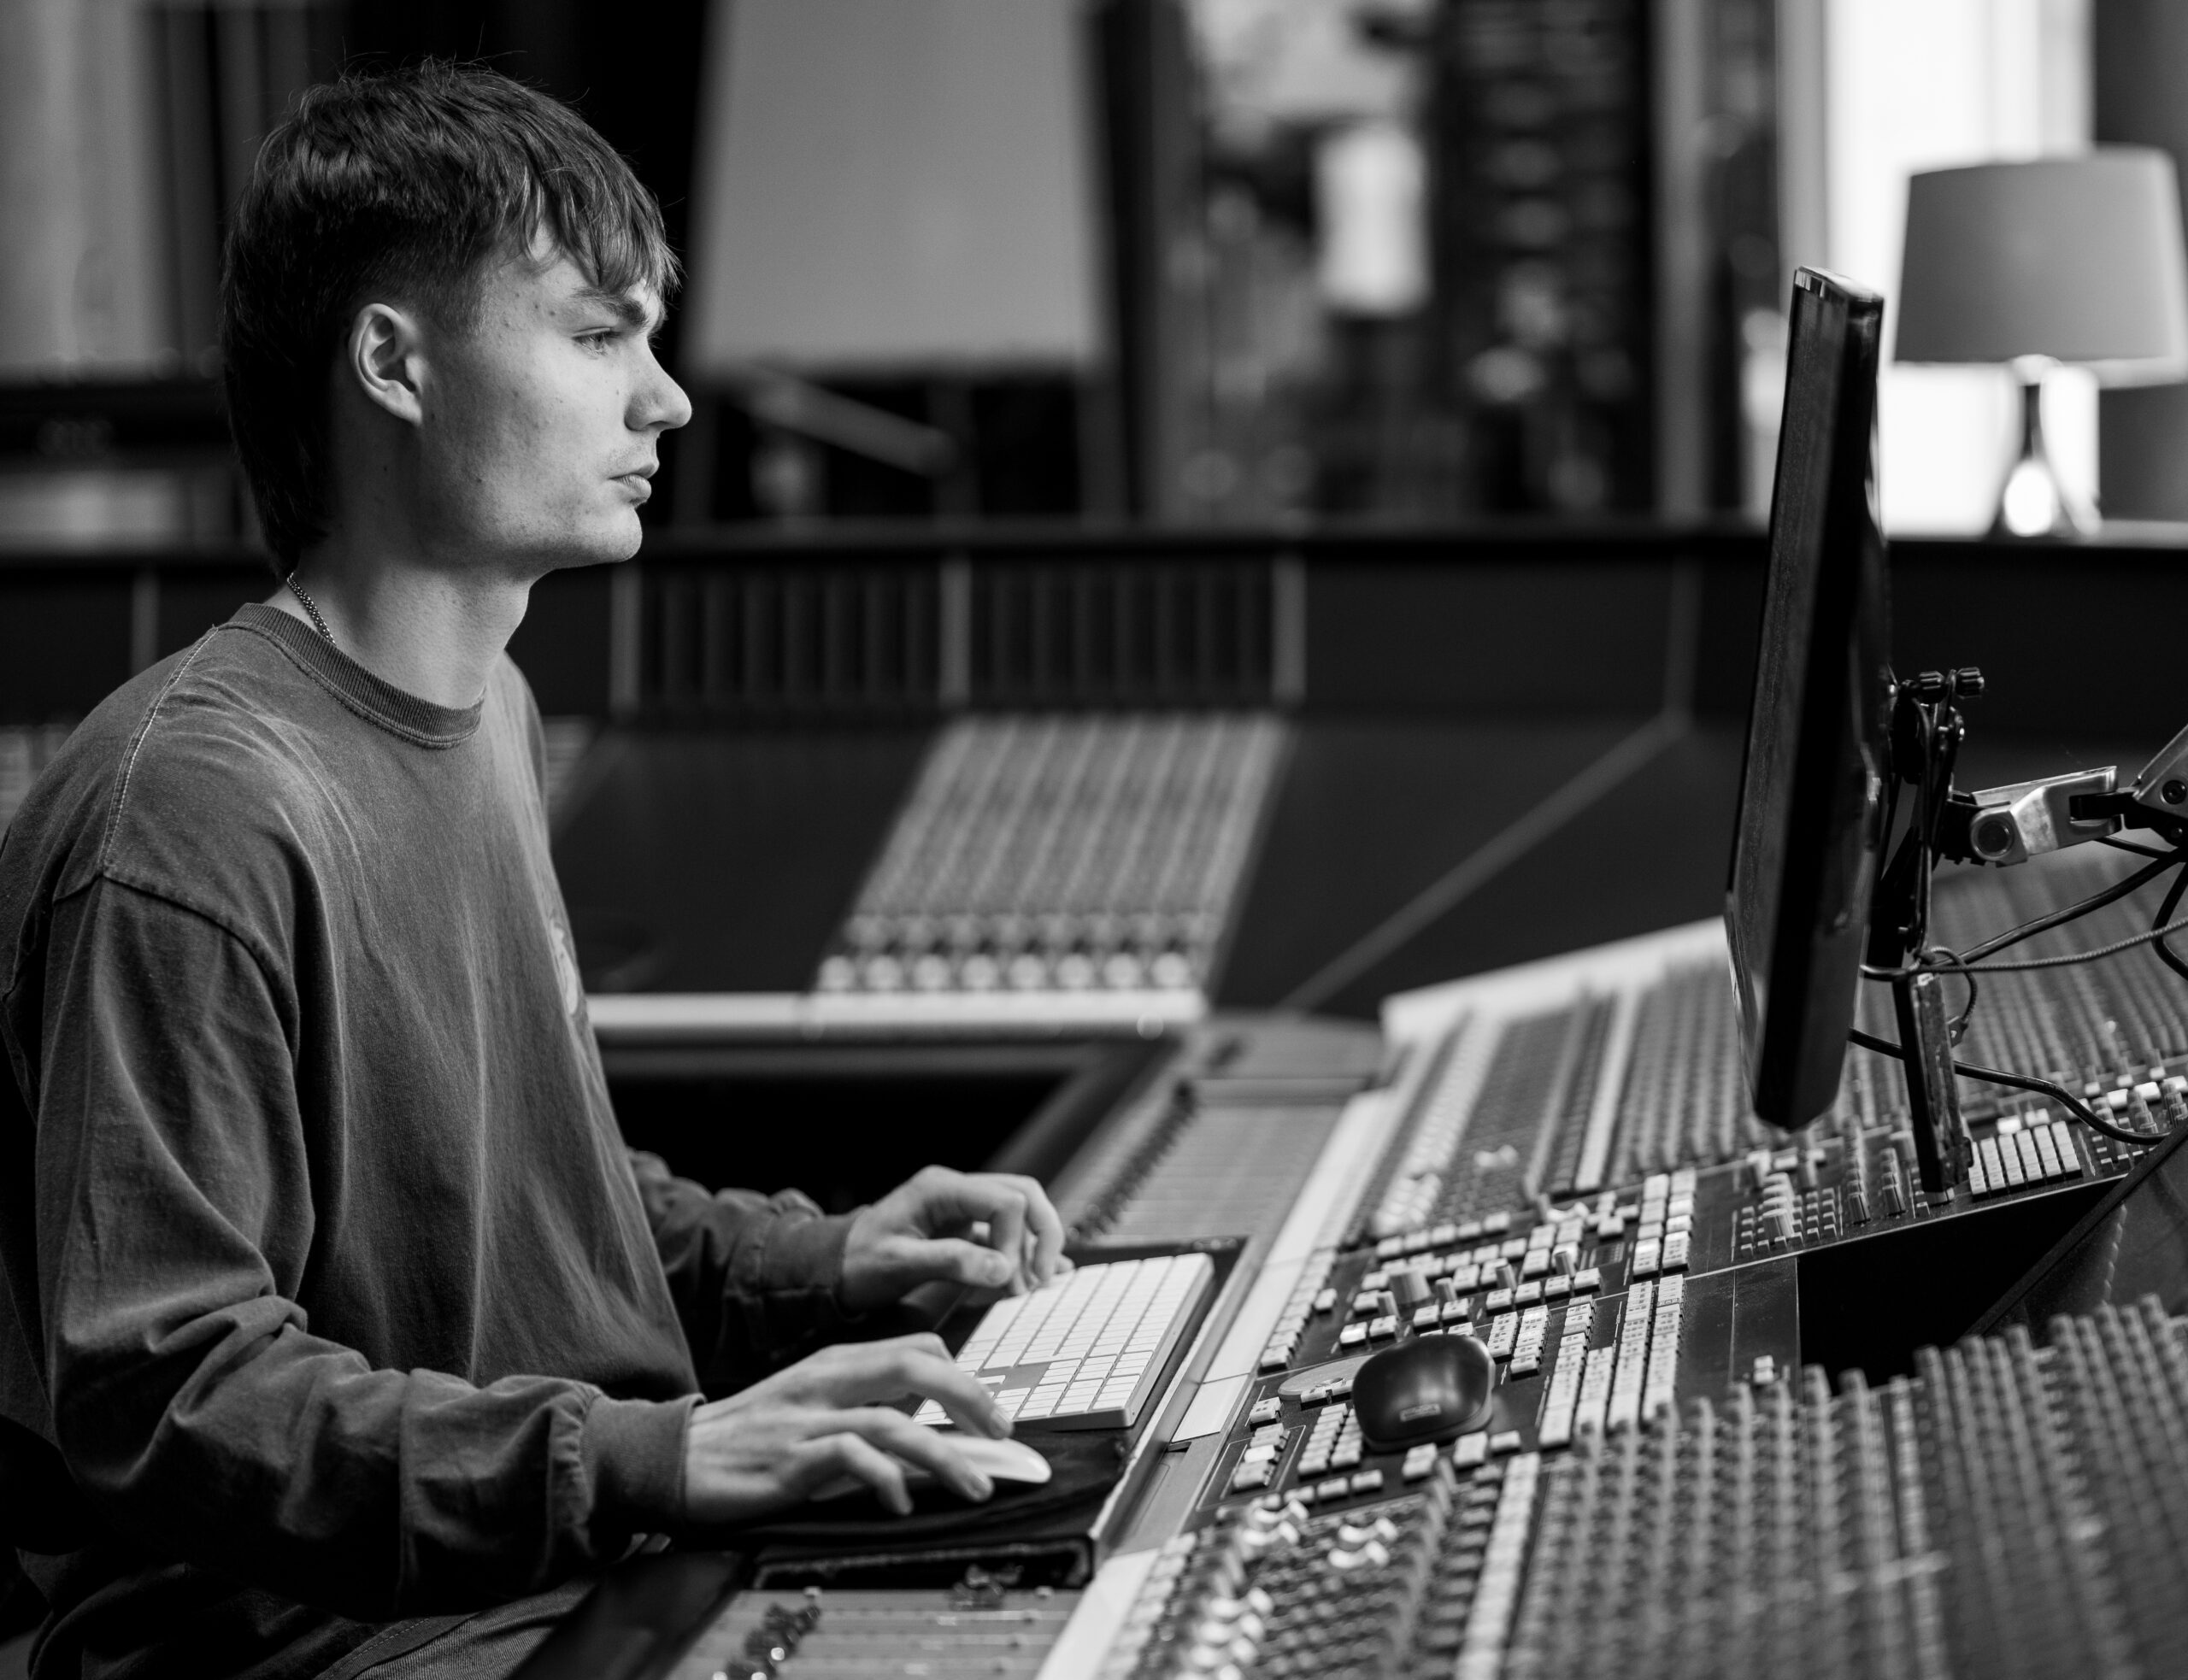 A black and white image of a man at a music mixing studio.